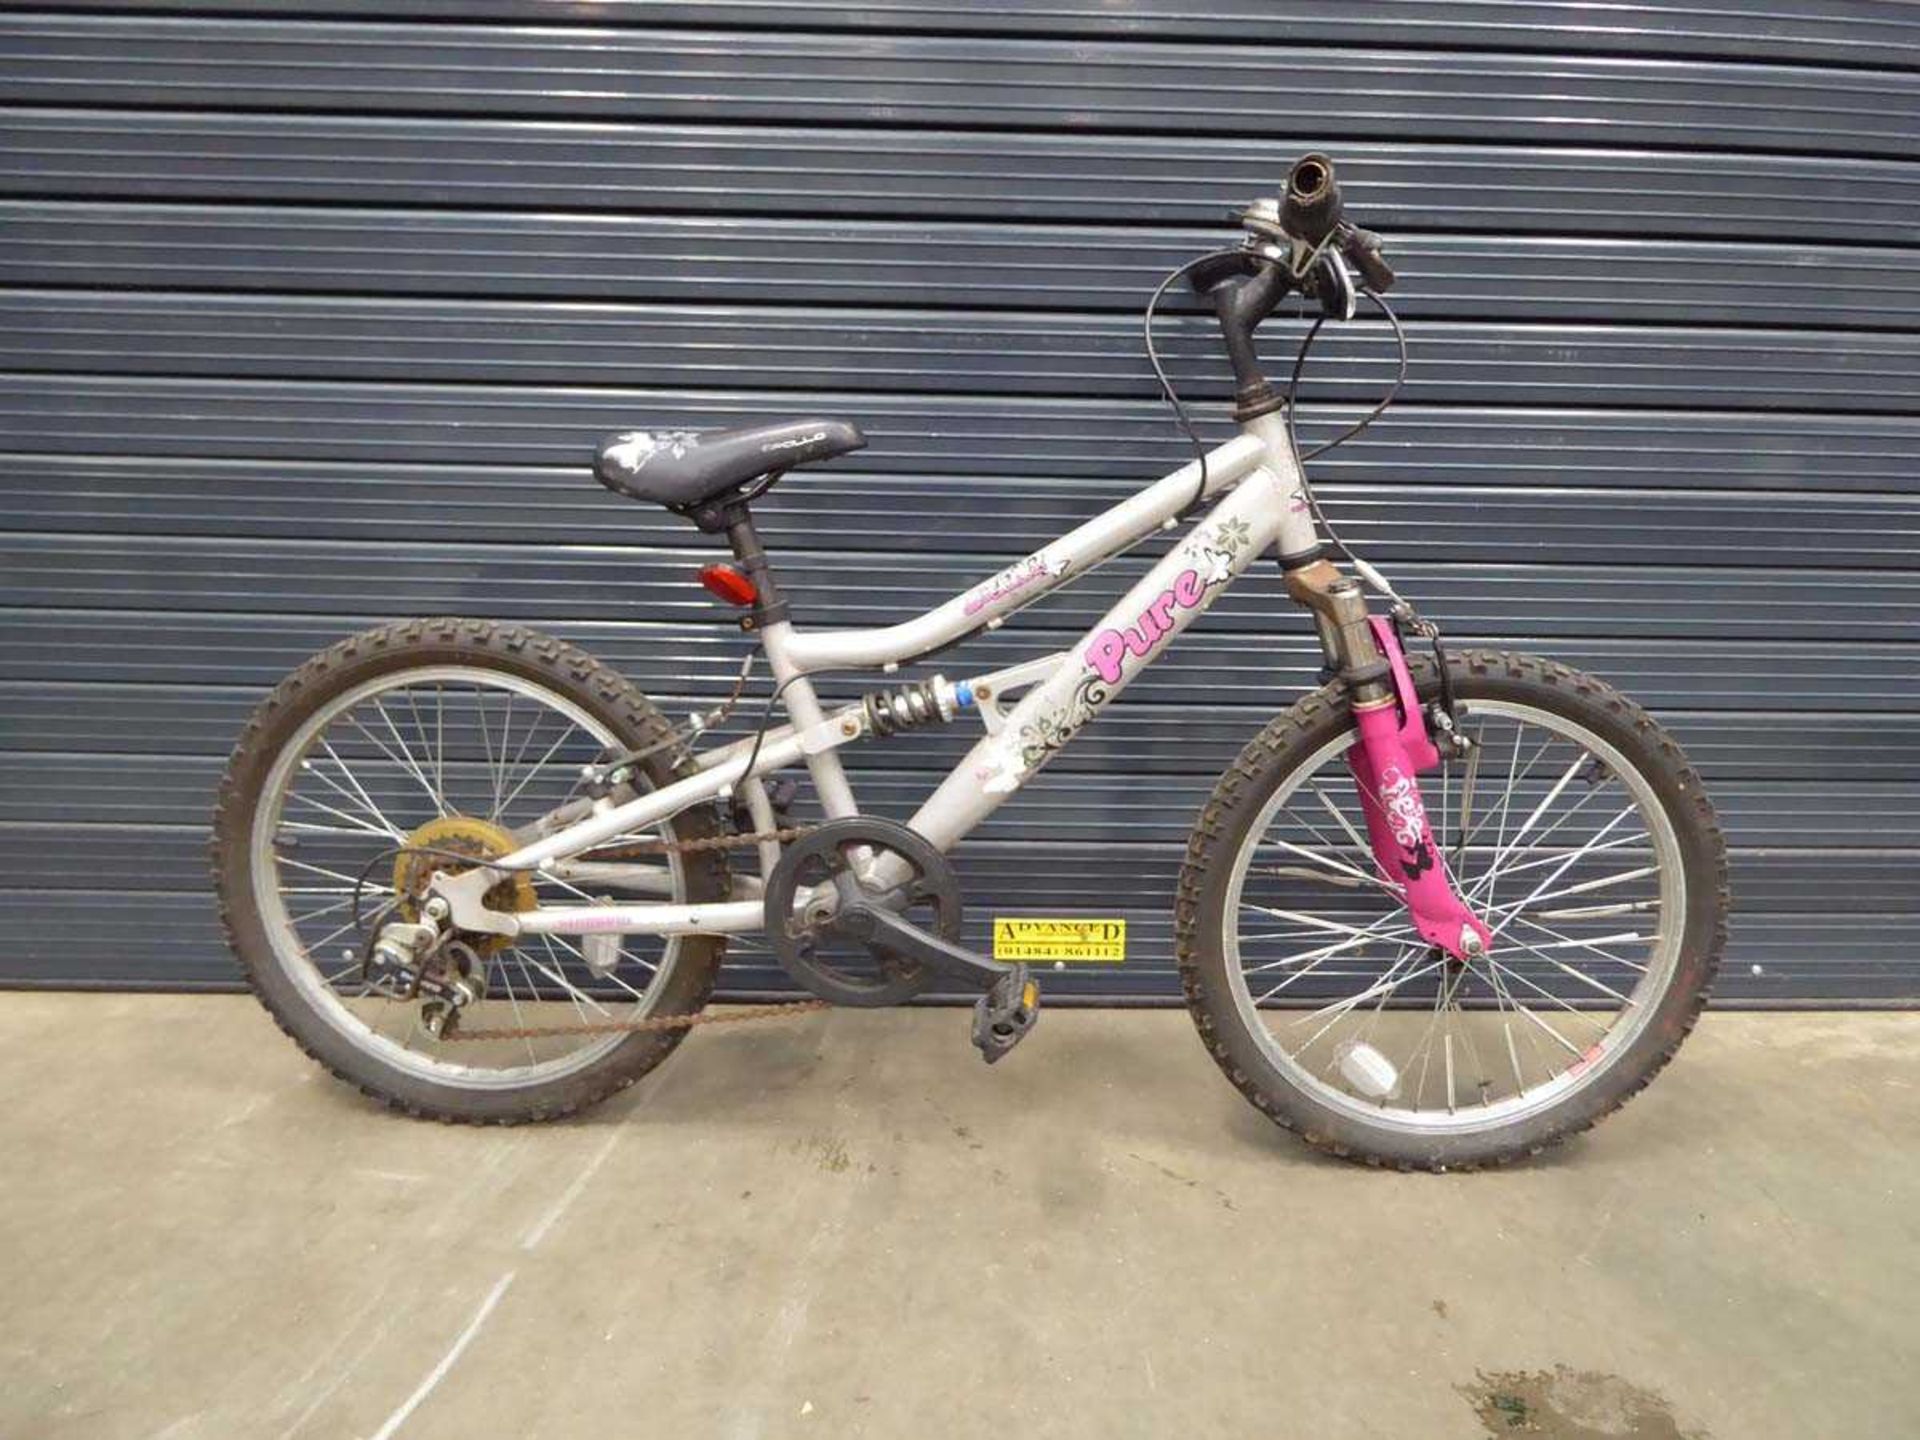 Silver youngsters mountain bike